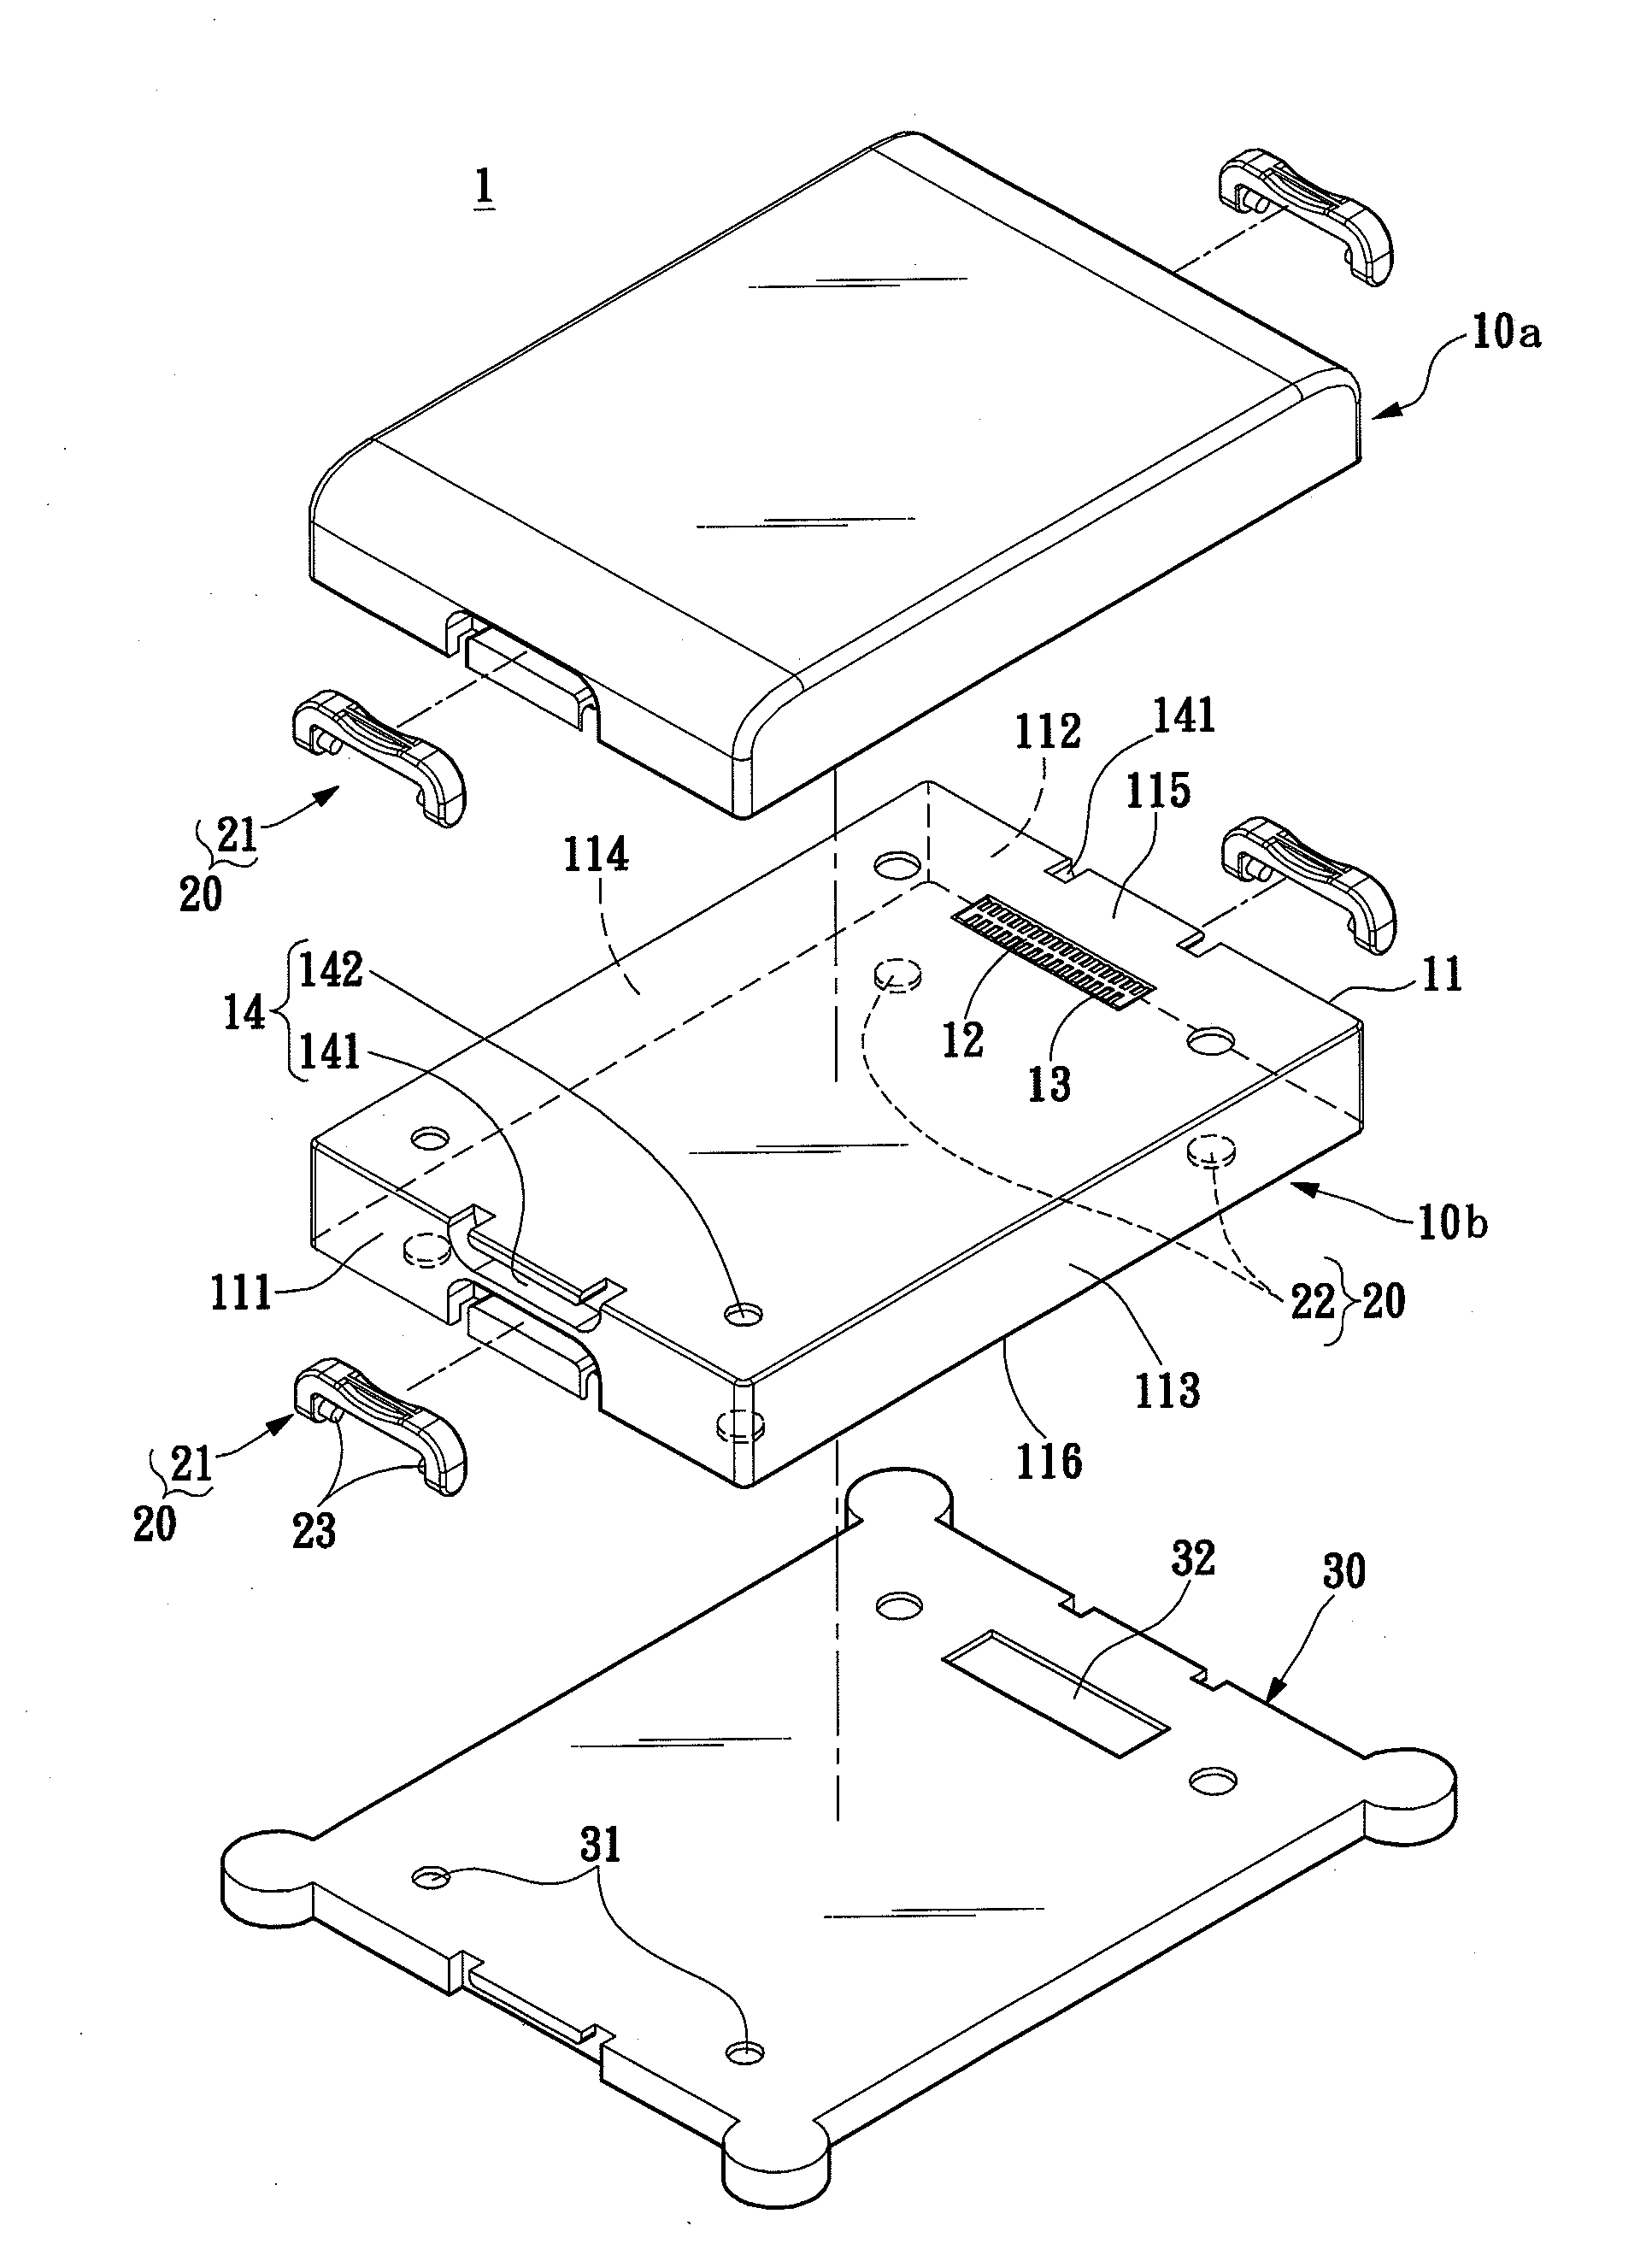 Electronic device assembly structure